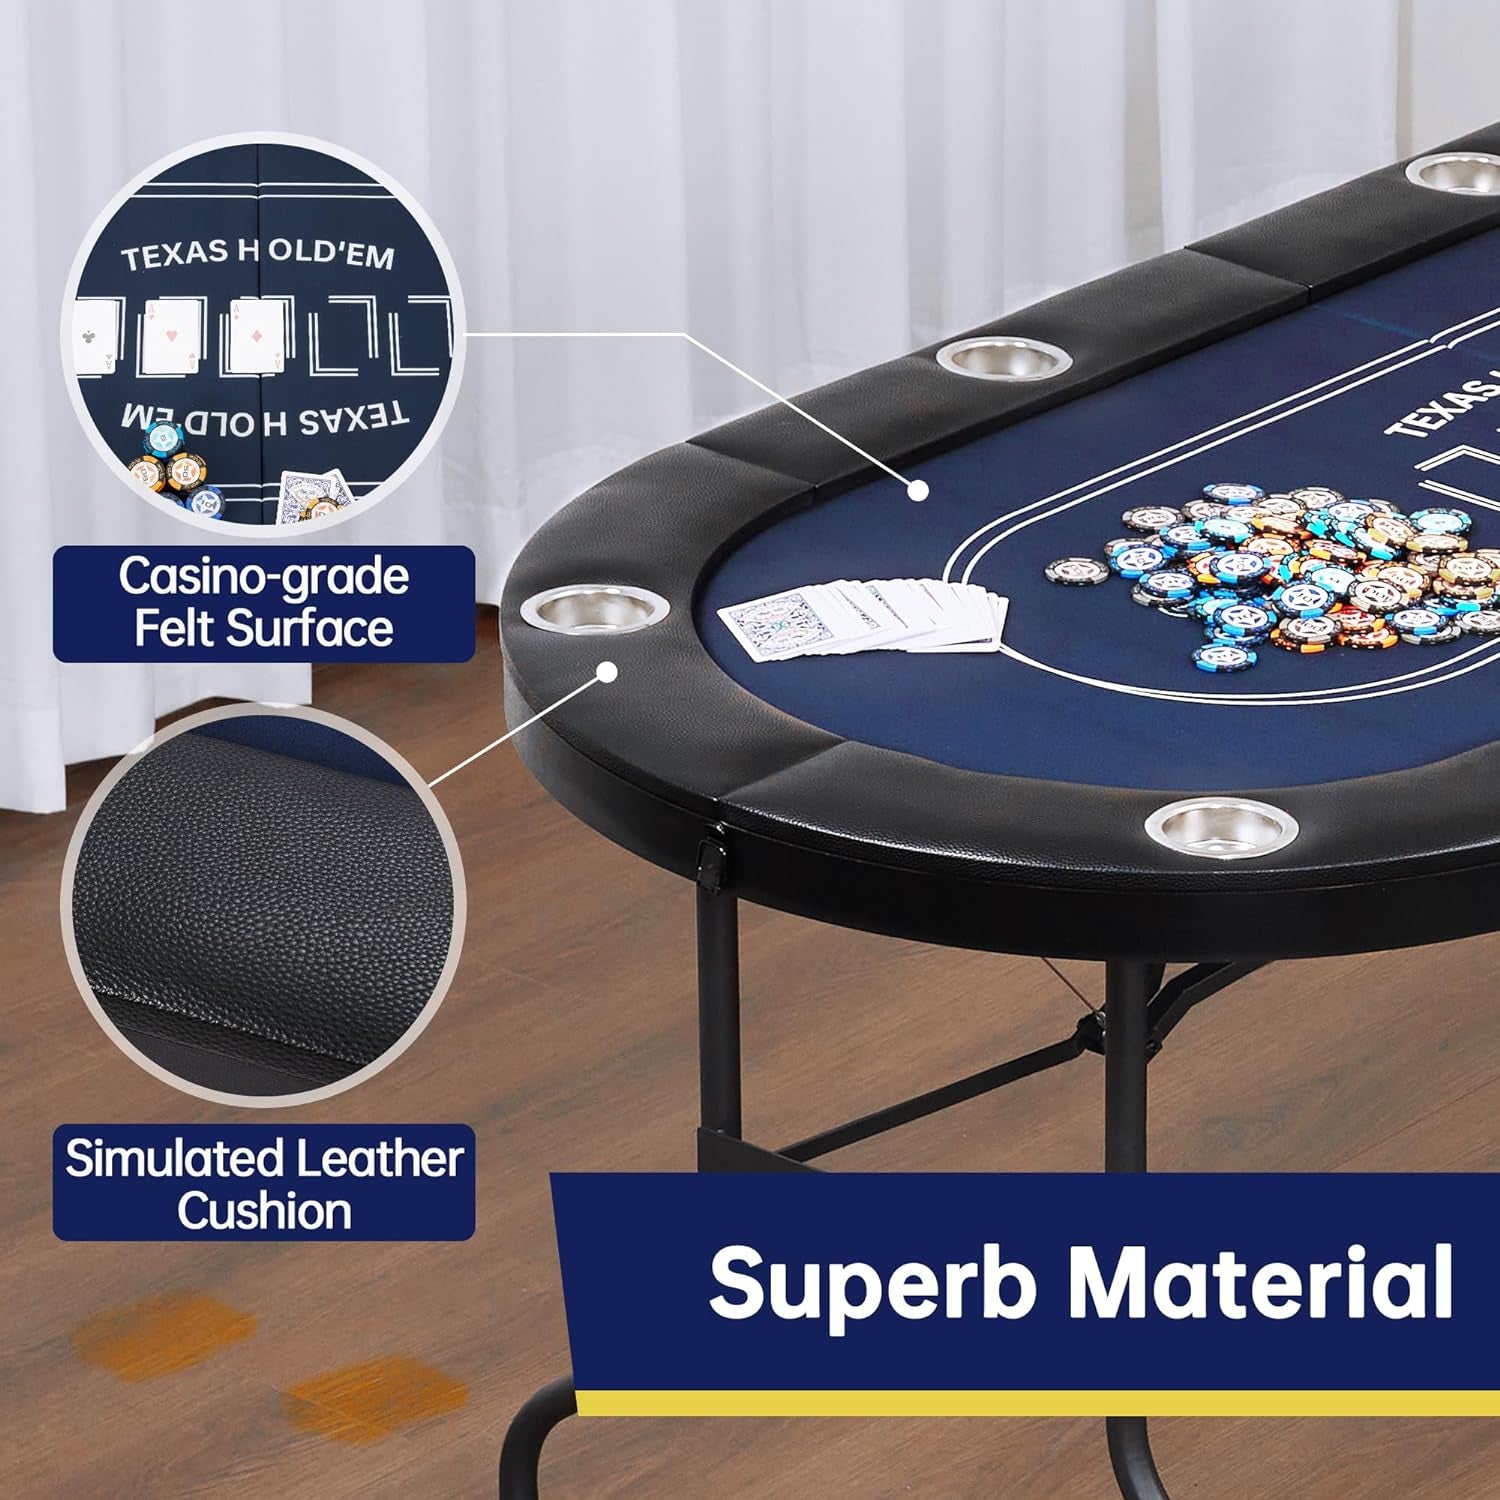 Foldable Poker Table-8 Player Texas Hold'Em Table, No Assembly Needed, Equipped with Cup Holders, Perfect for Homes, Parties, Game Rooms, Stylish Blue Design